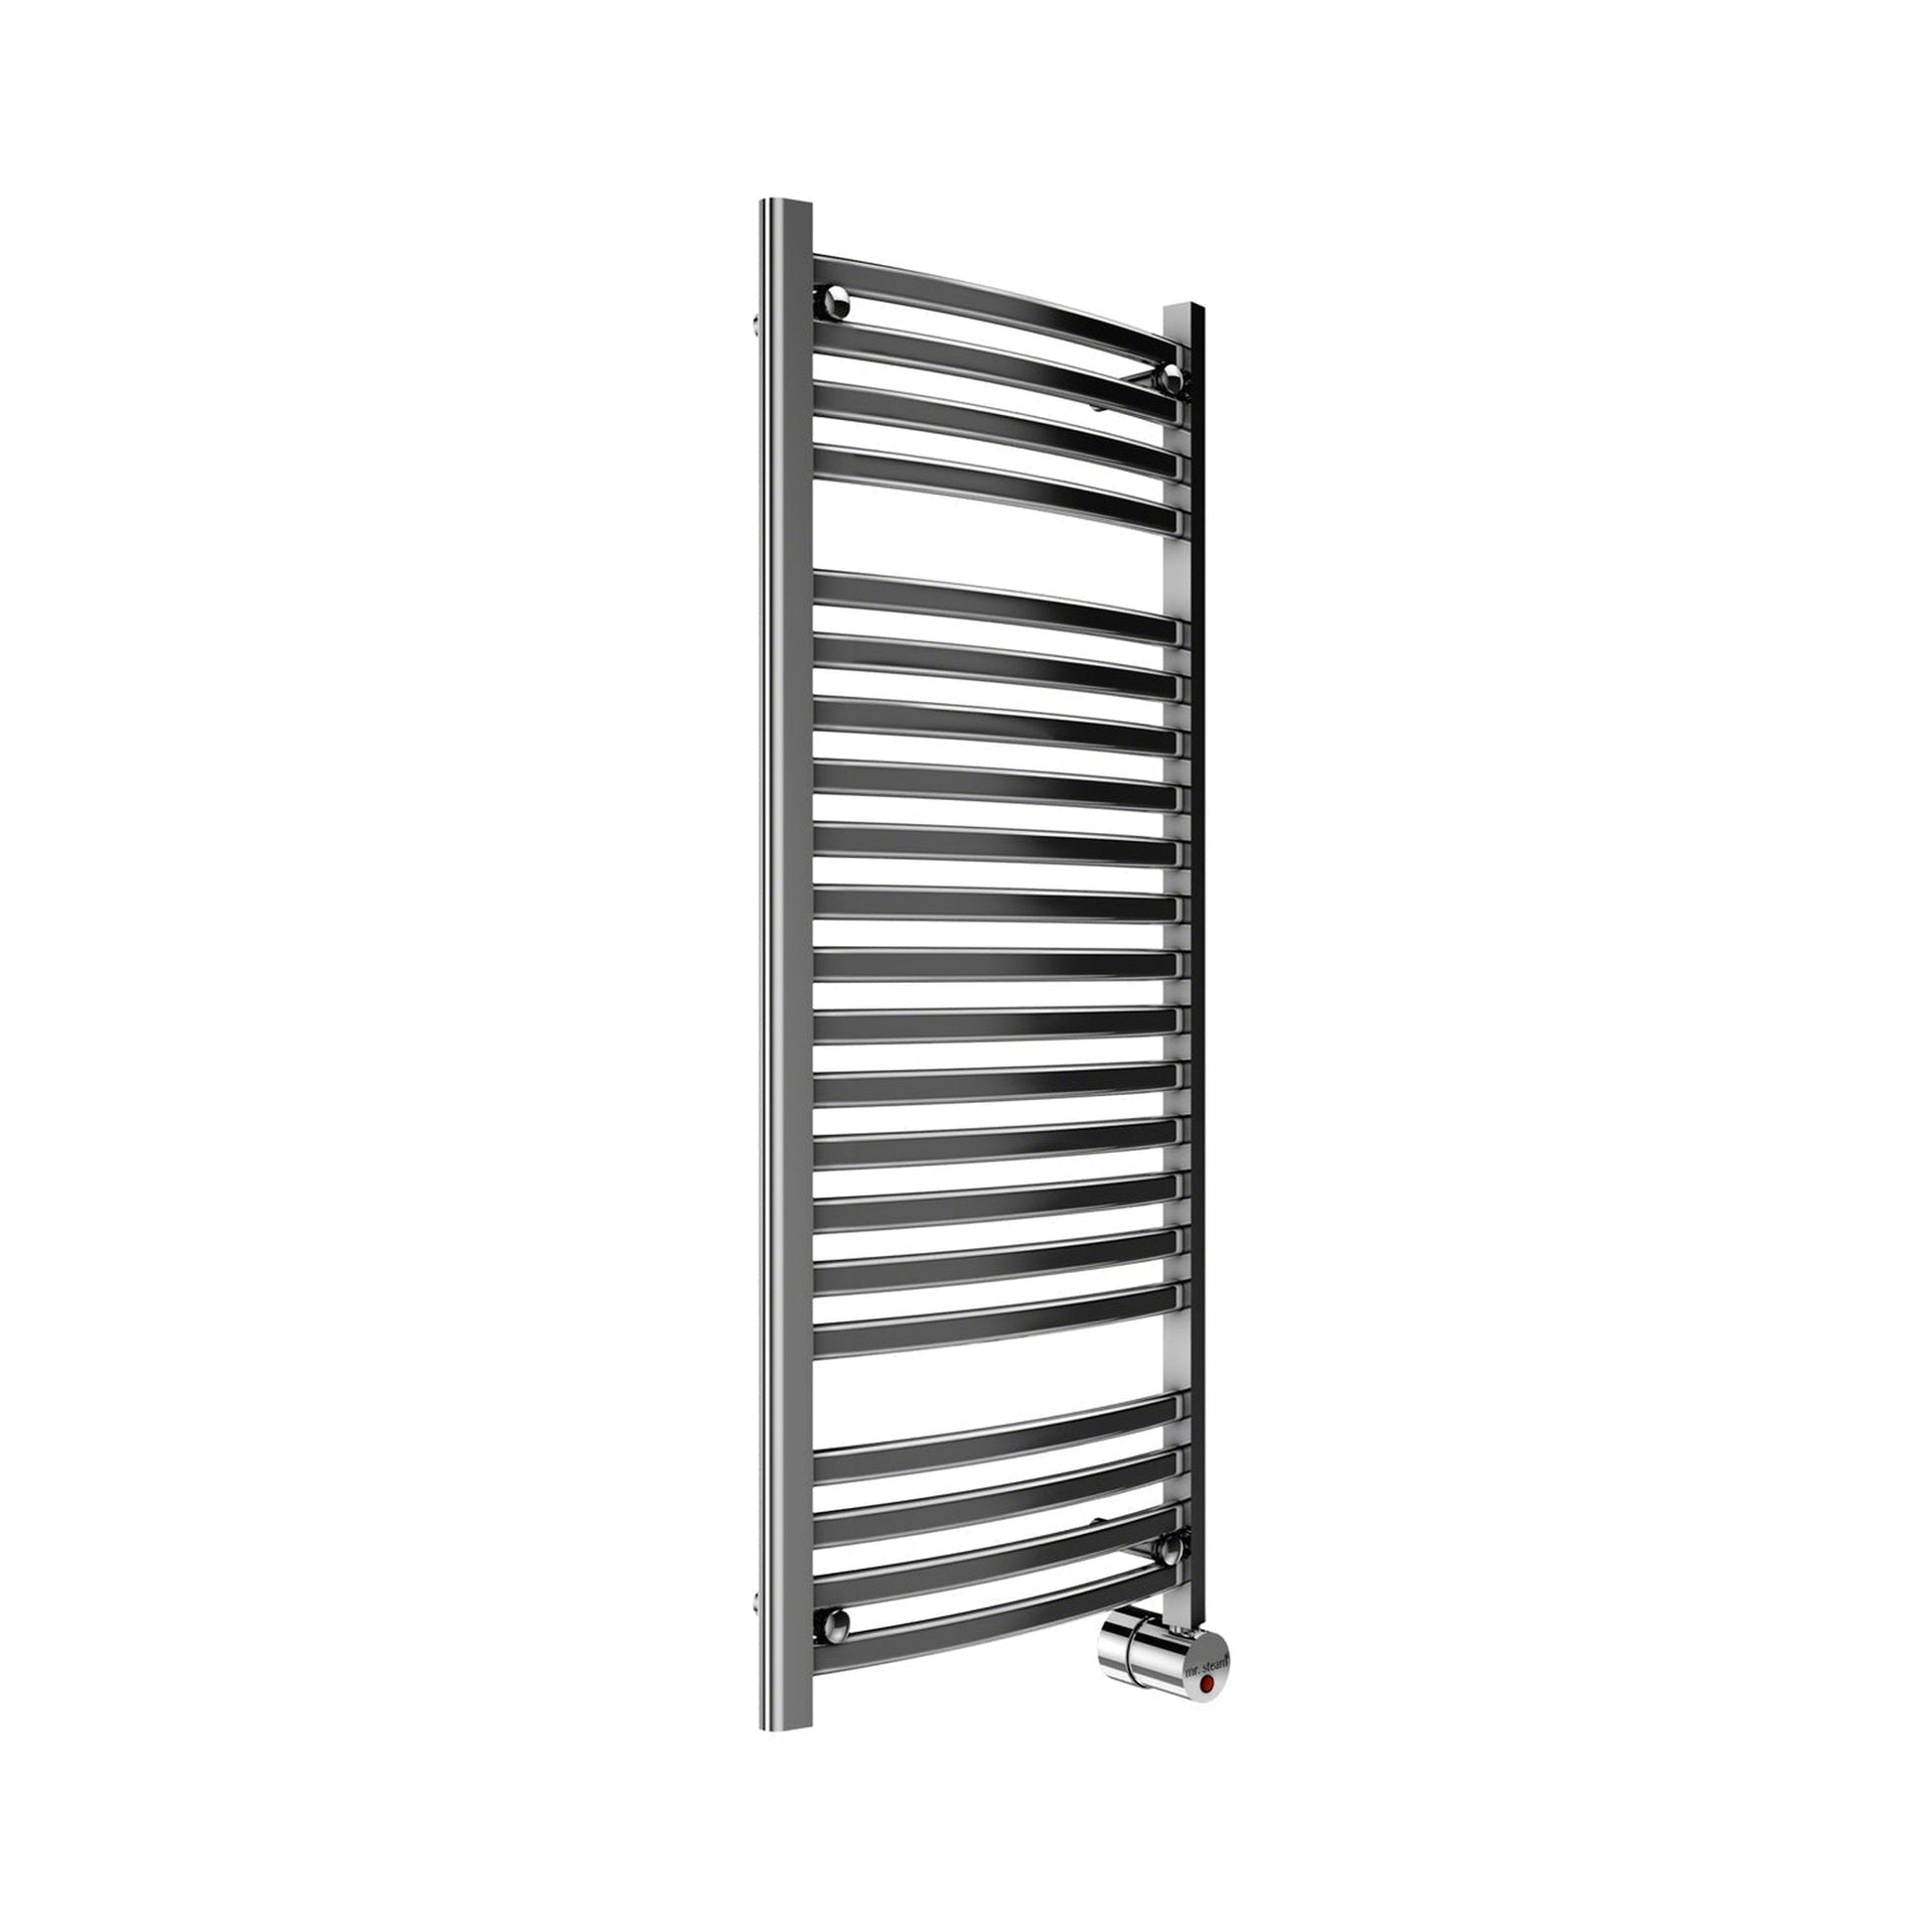 MrSteam Broadway Collection 20" x 48" 21-Bar Polished Chrome Hardwired Wall-Mounted Electric Towel Warmer With Digital Timer and Built-in Aromatherapy Oil Well